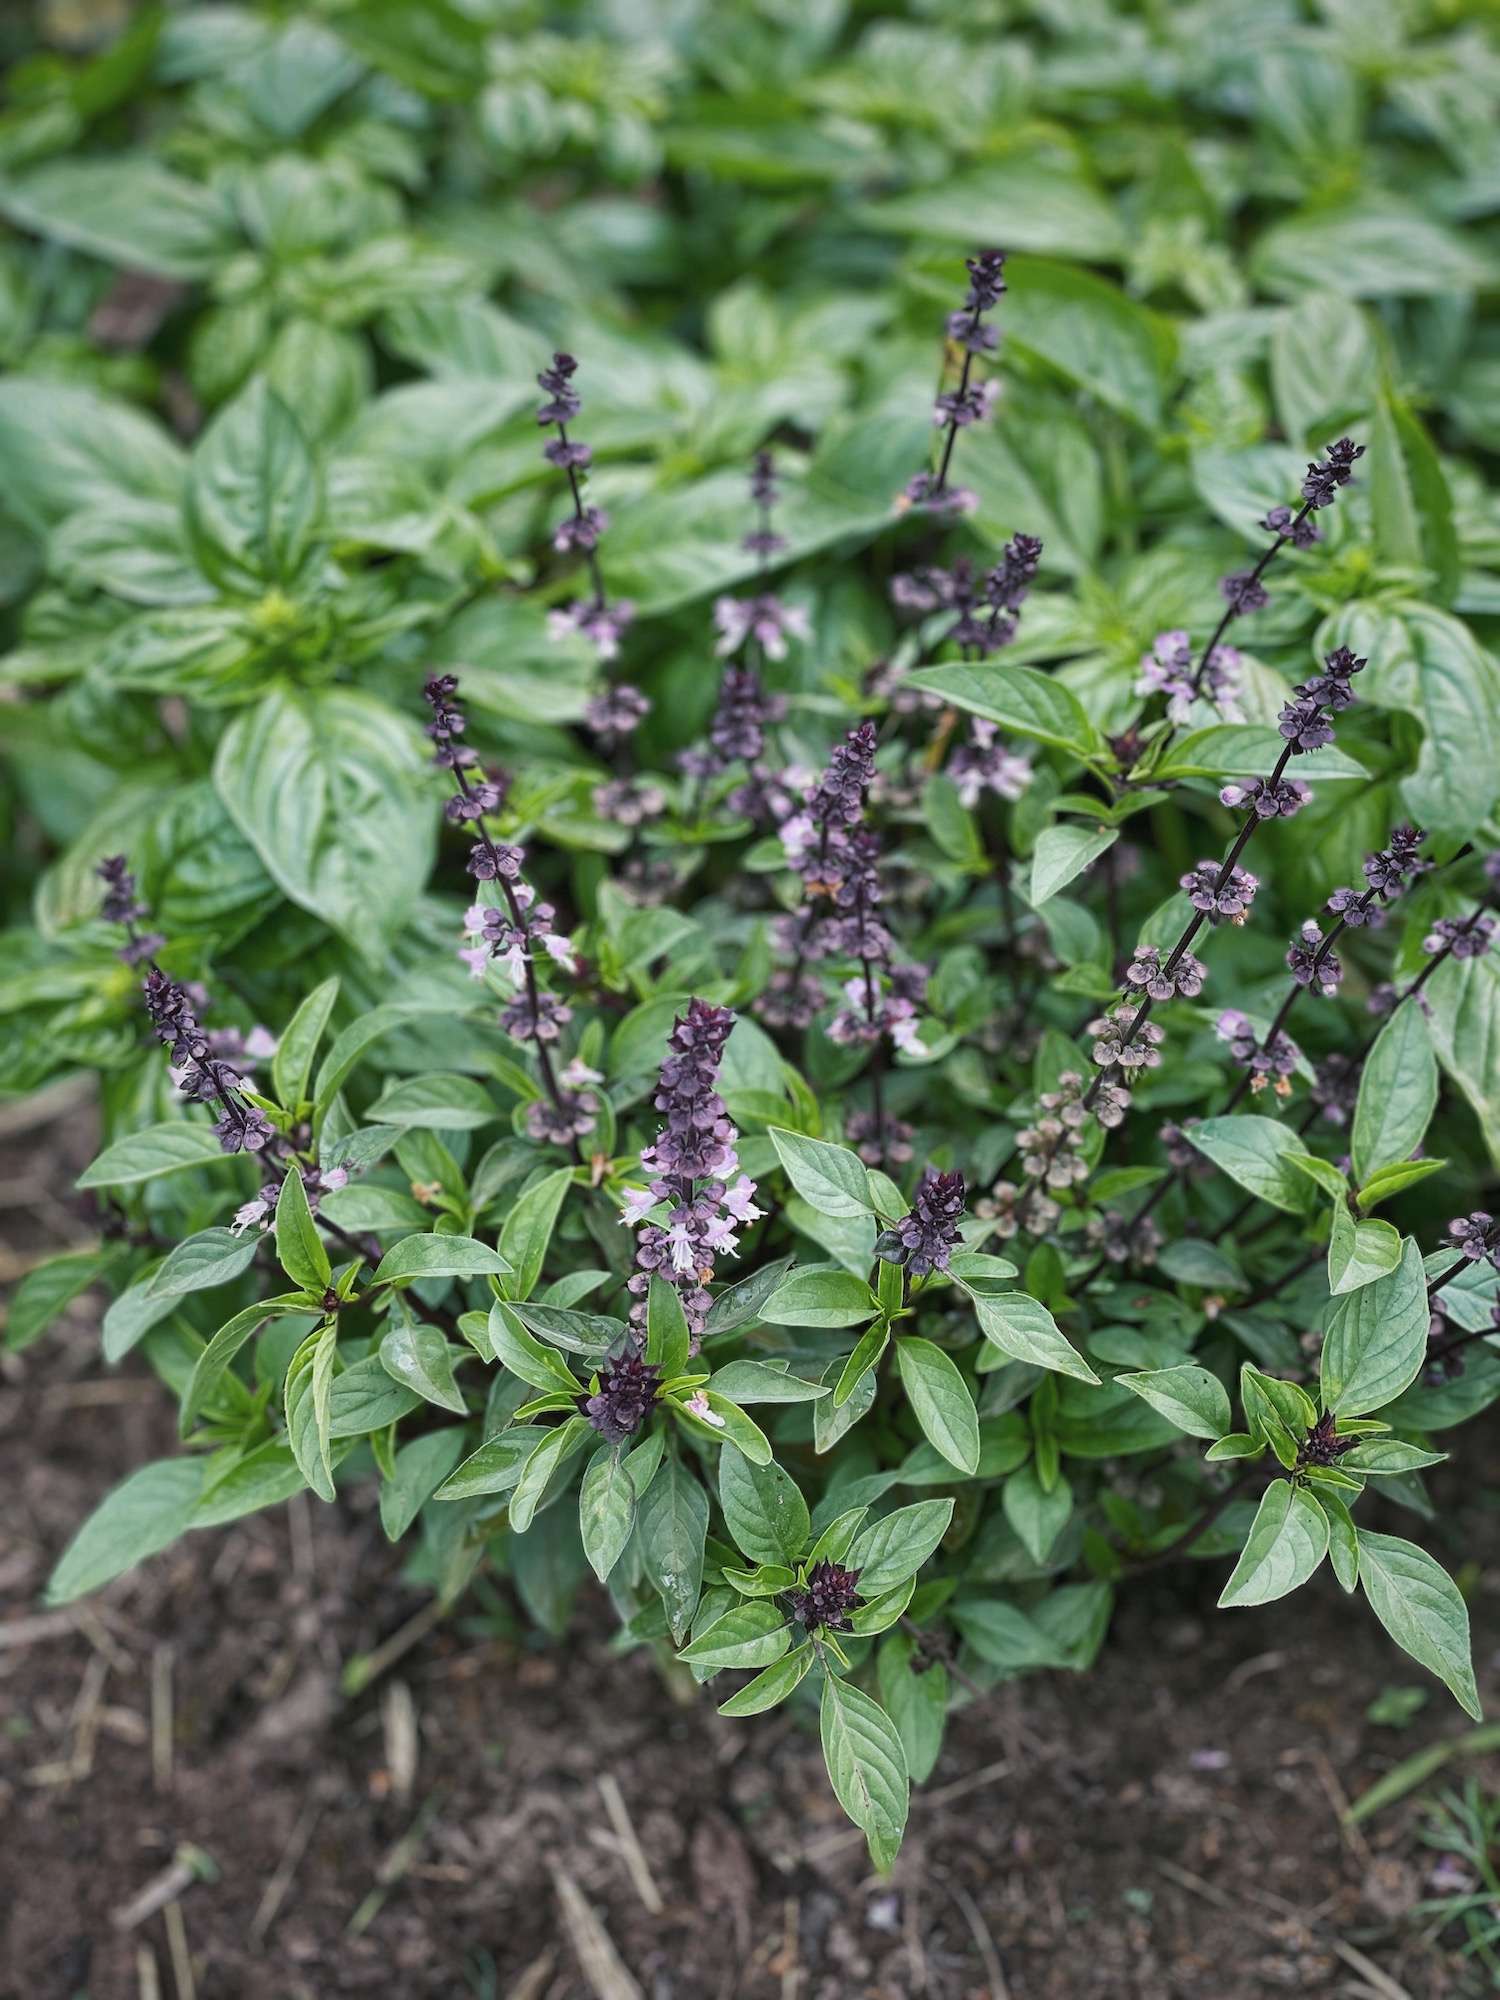 A photo of a thai basil plant flowering in front of sweet basil plants